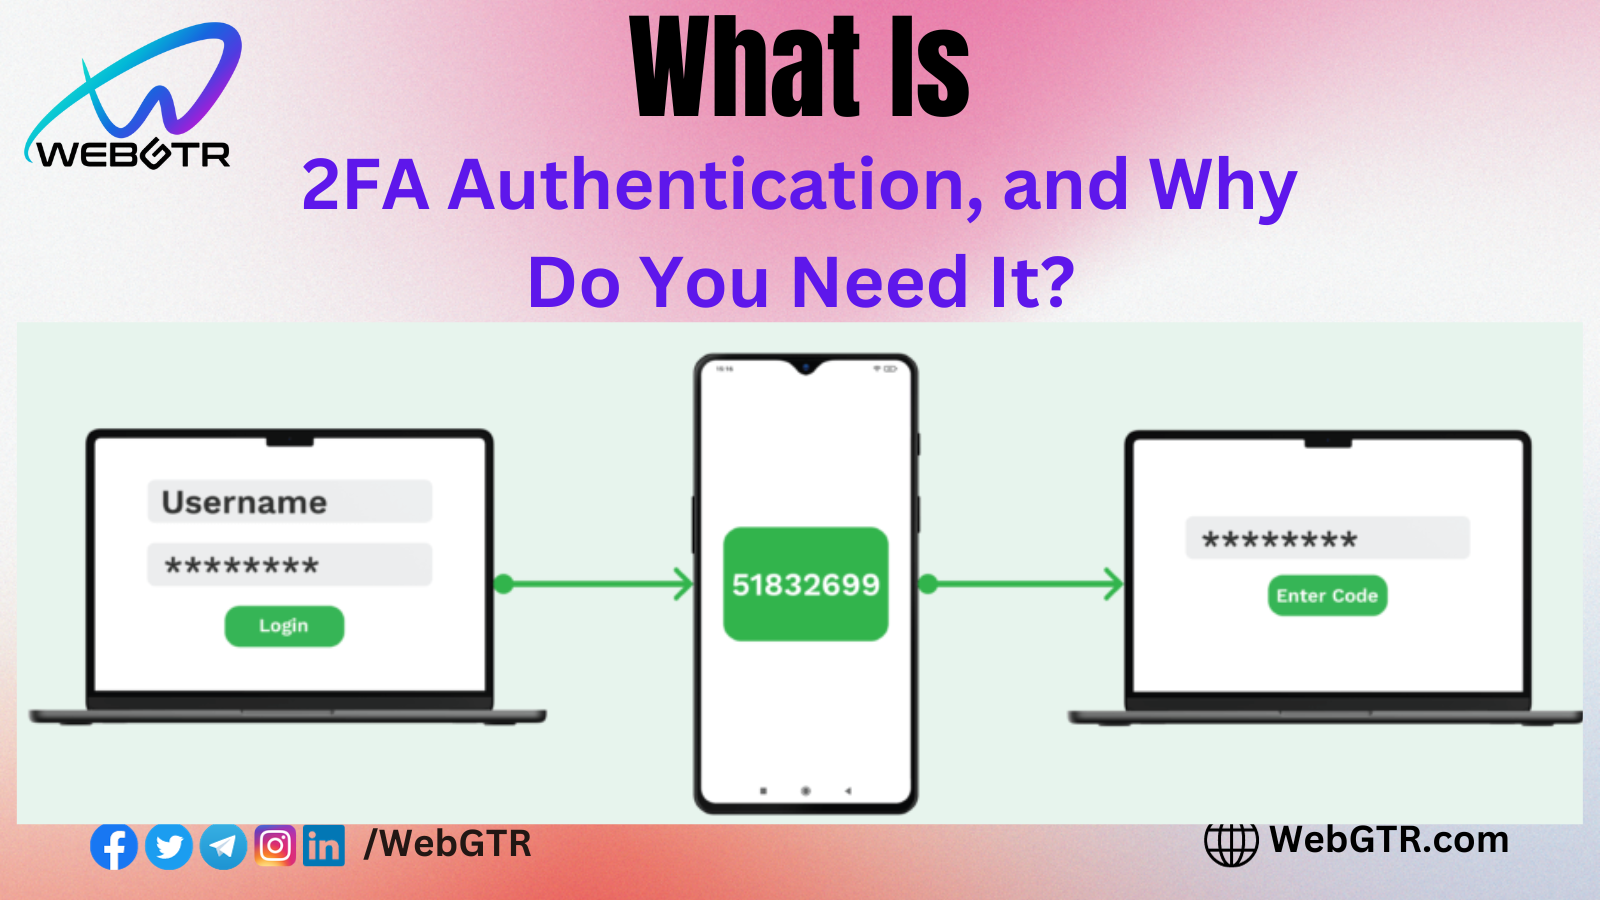 What Is 2FA Authentication, and Why Do You Need It?